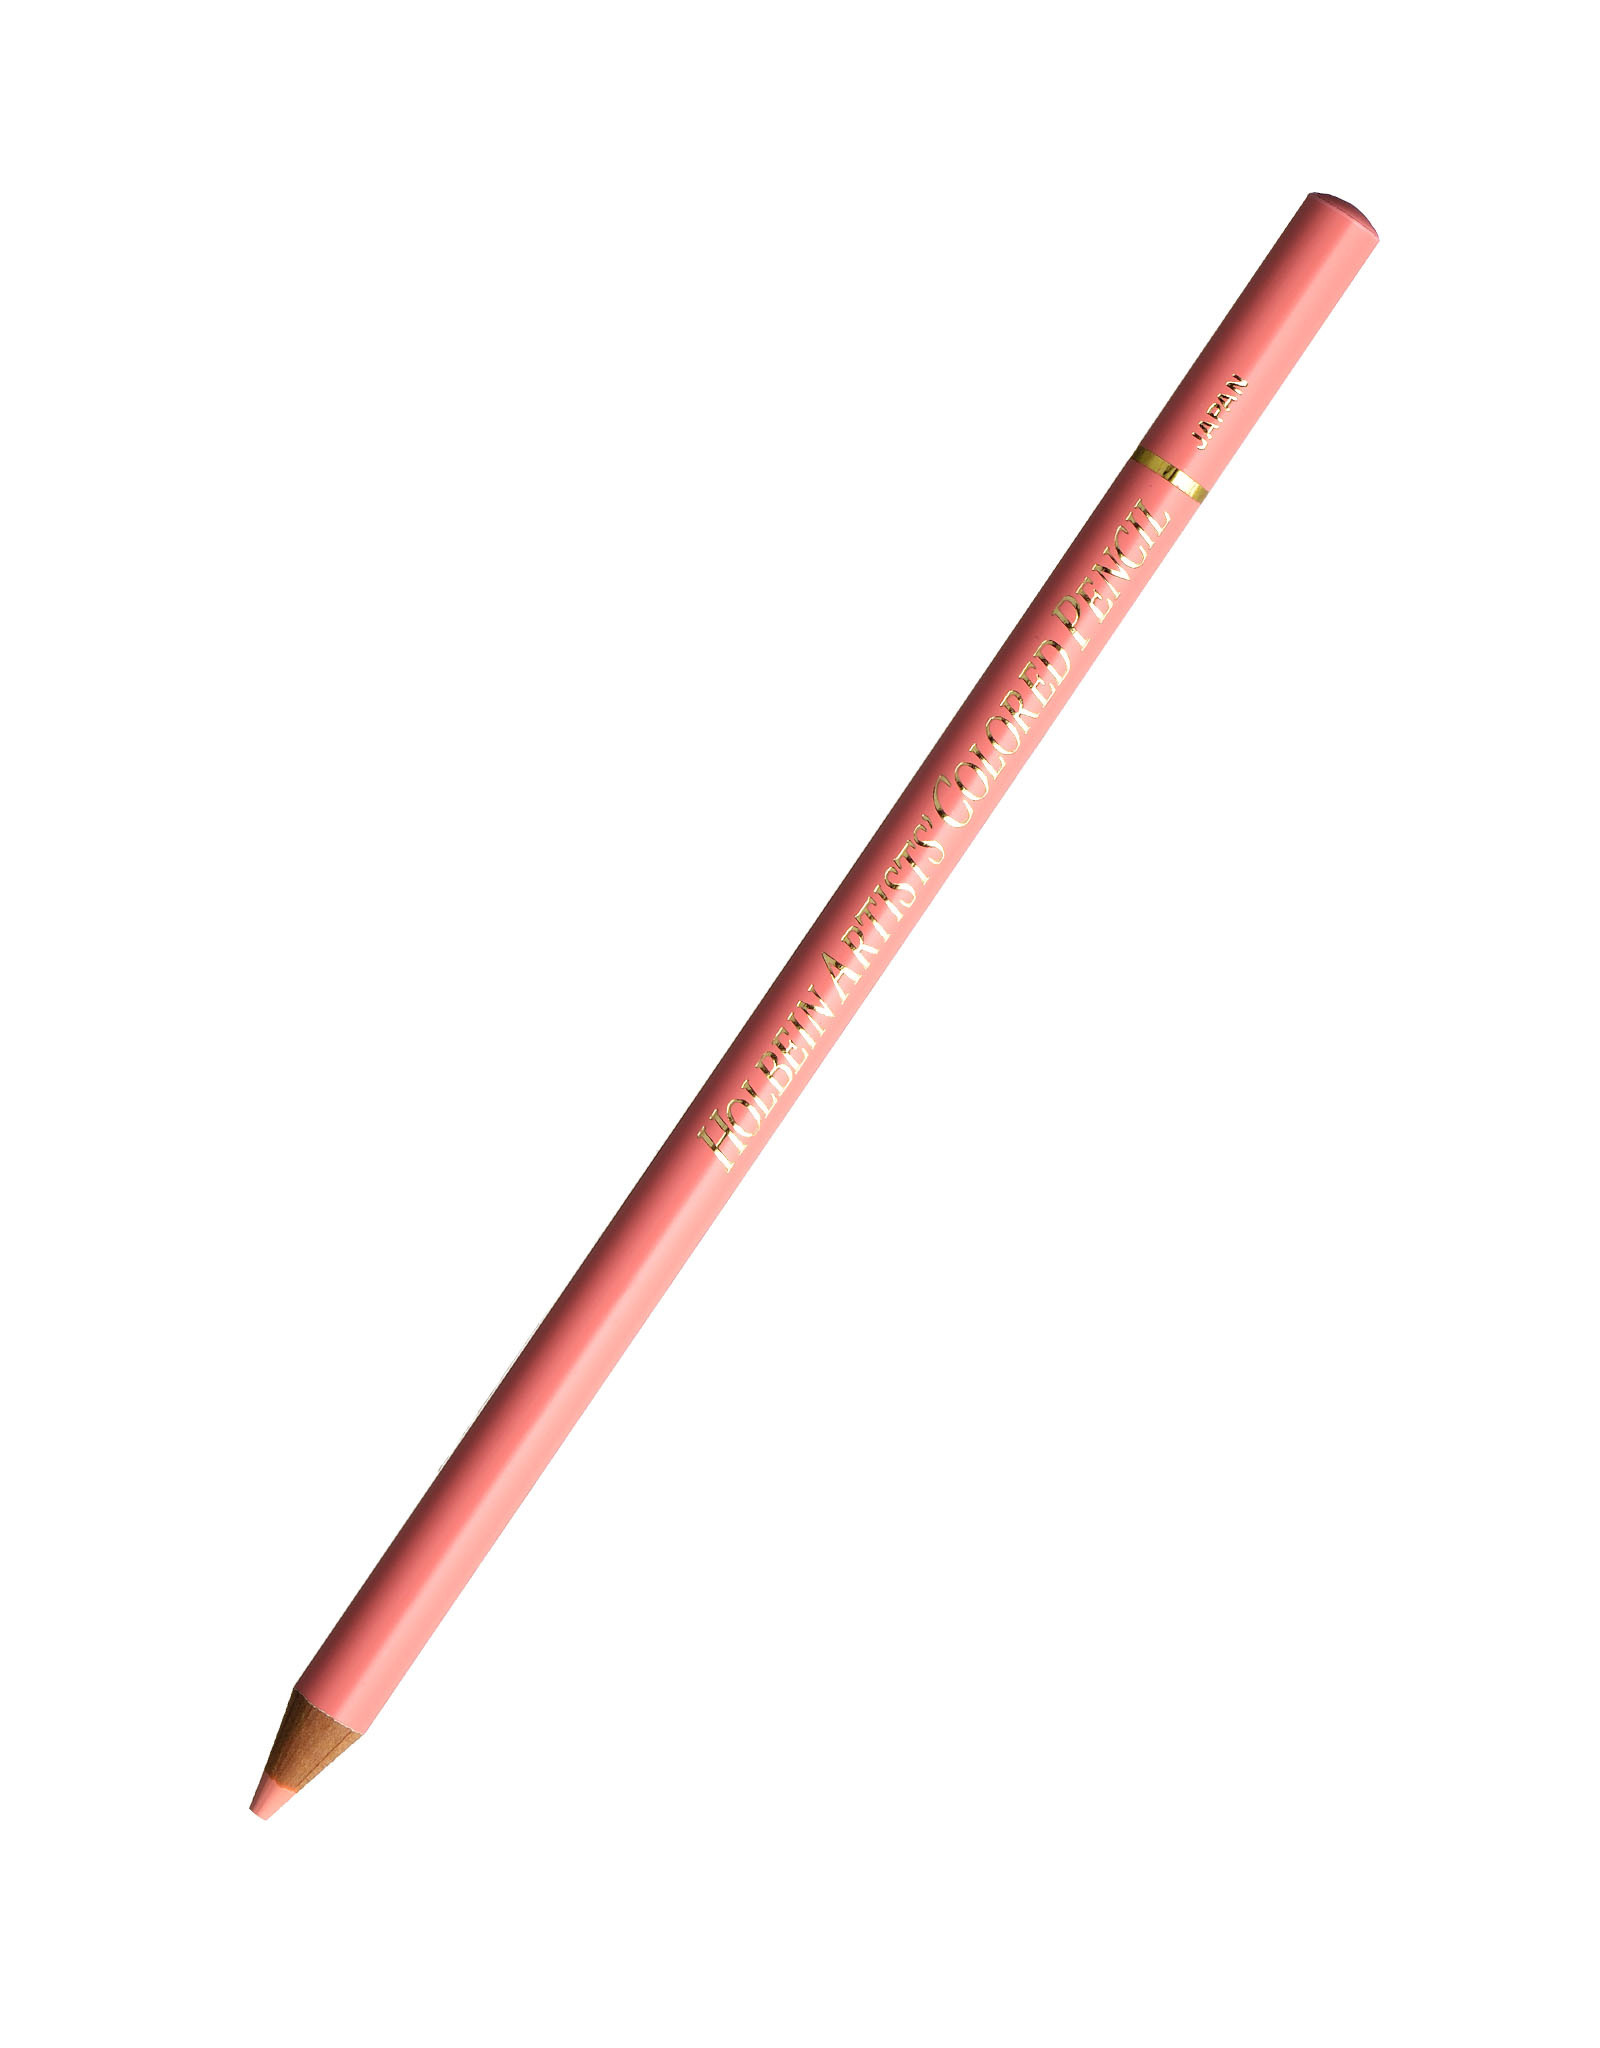 HOLBEIN Holbein Colored Pencil, Pink